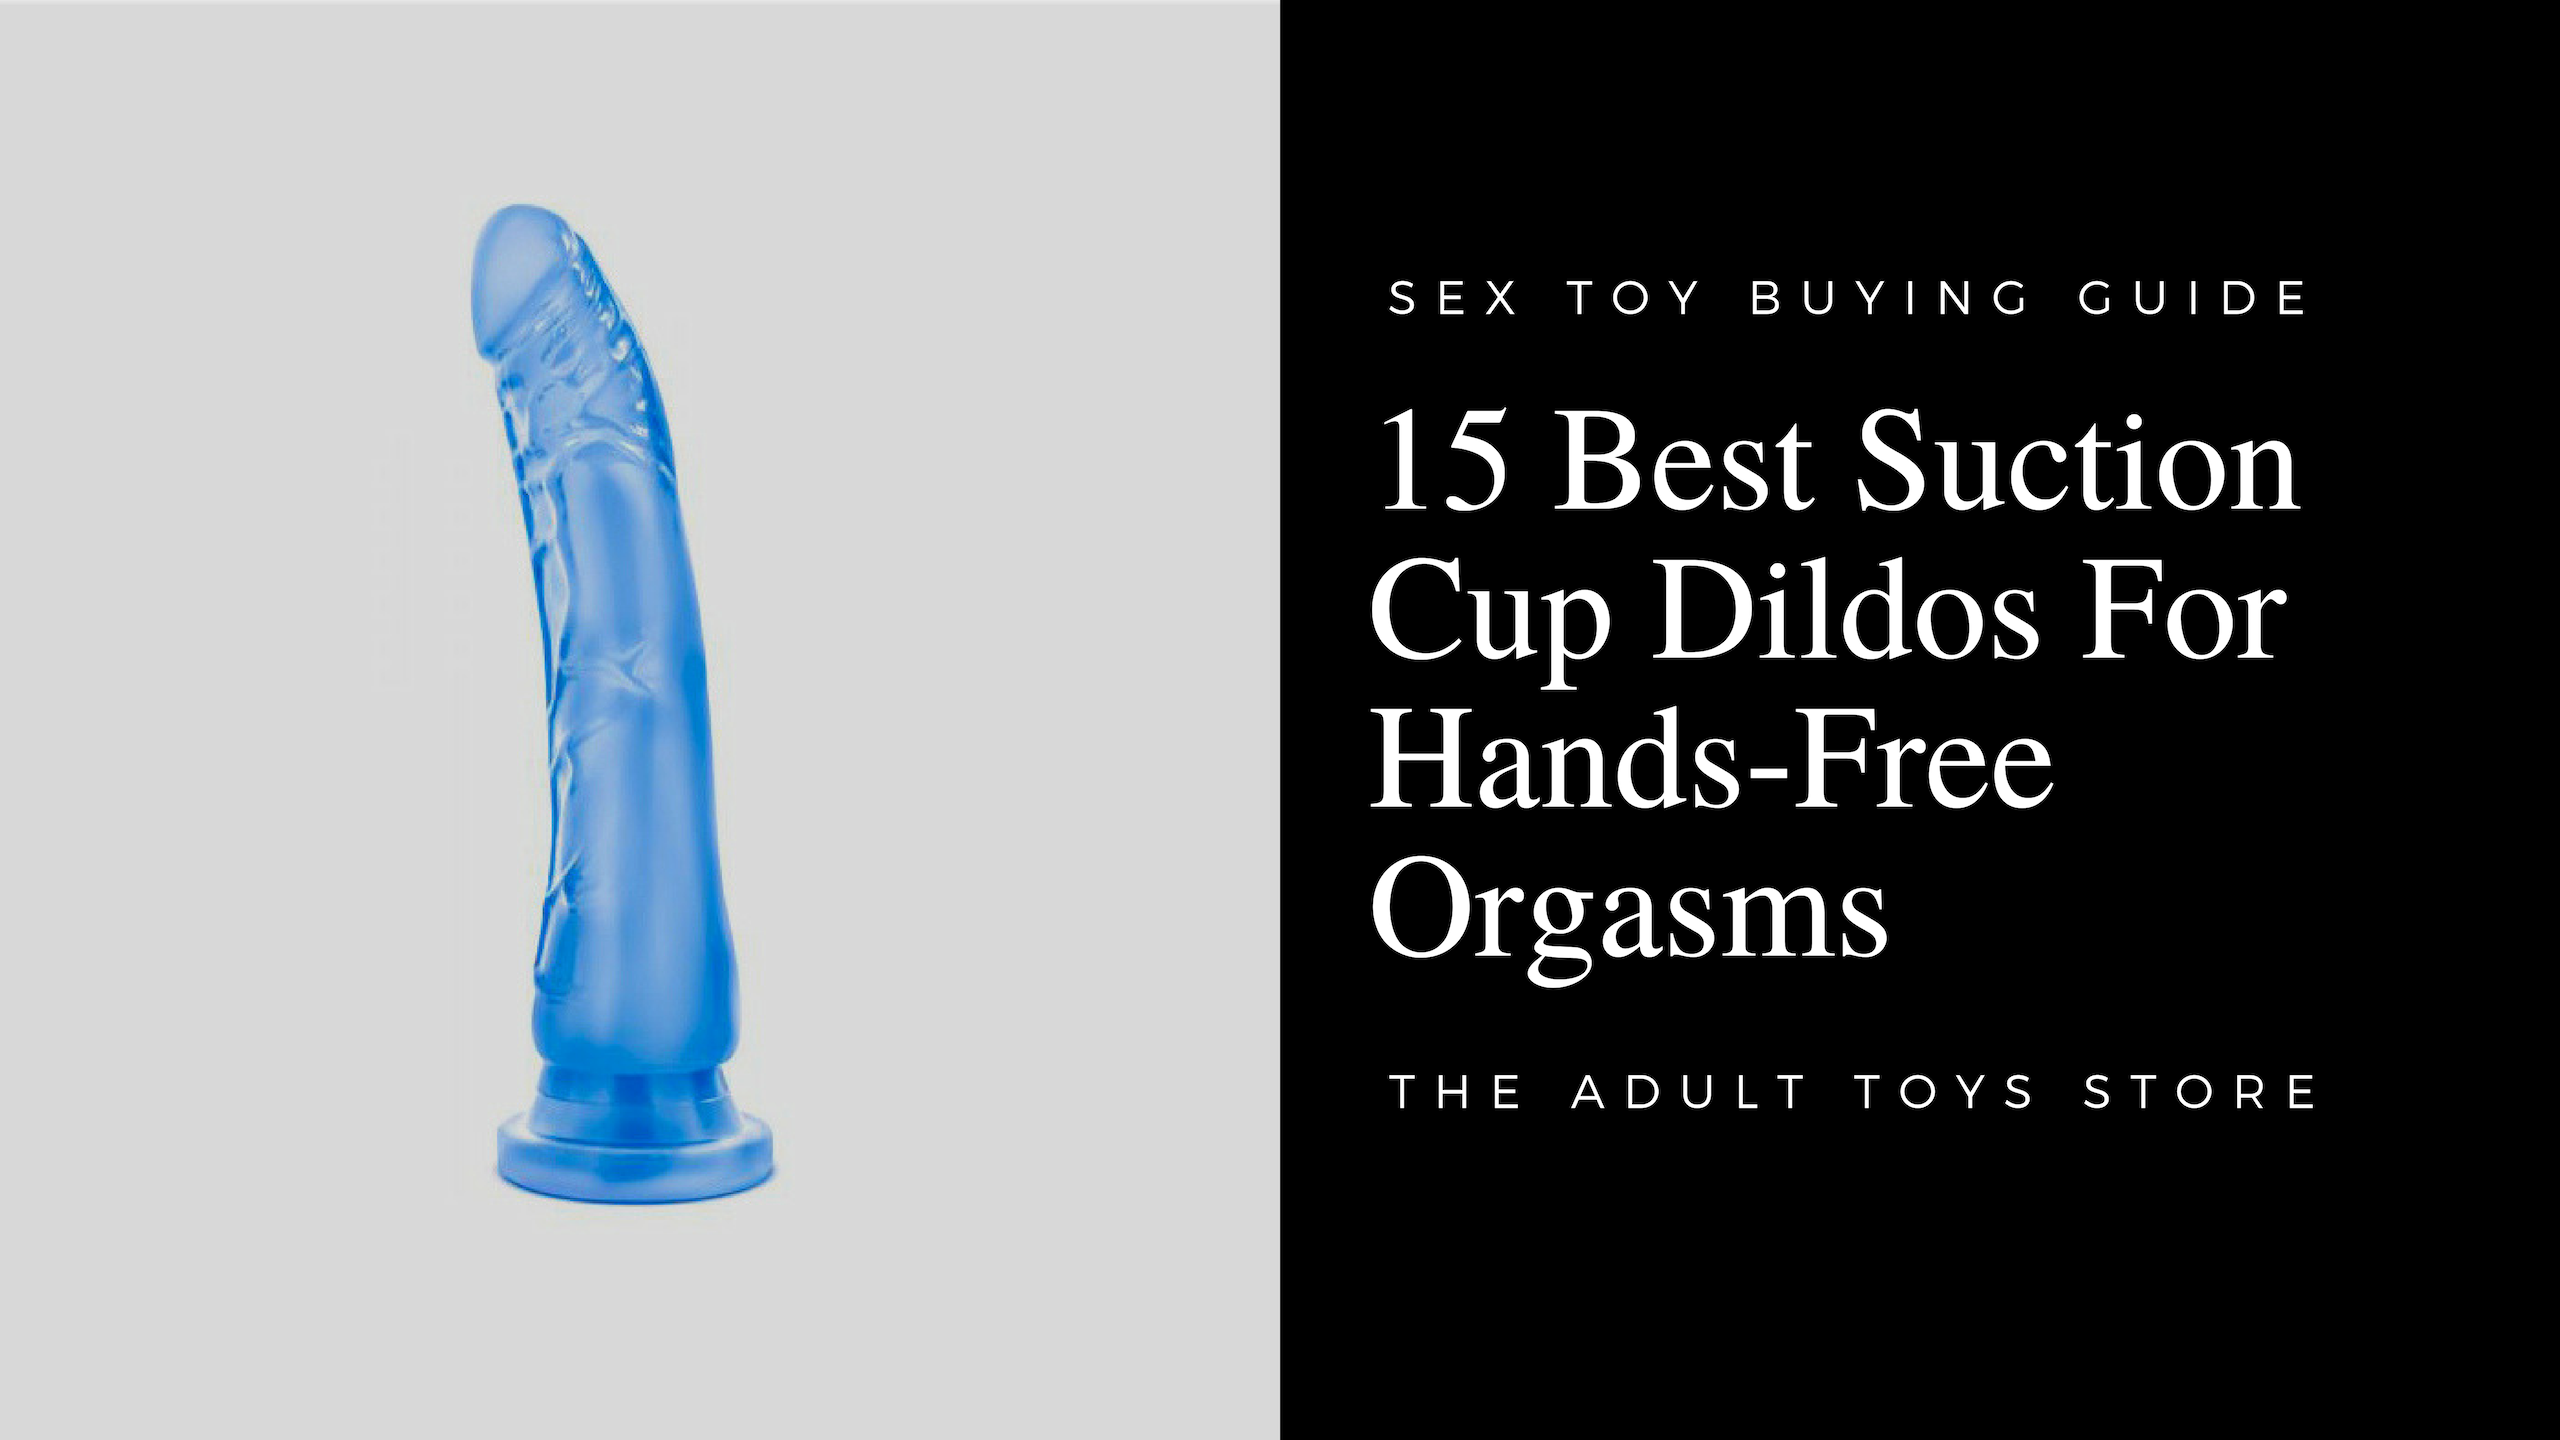 15 Best Suction Cup Dildos For Hands-Free Orgasms